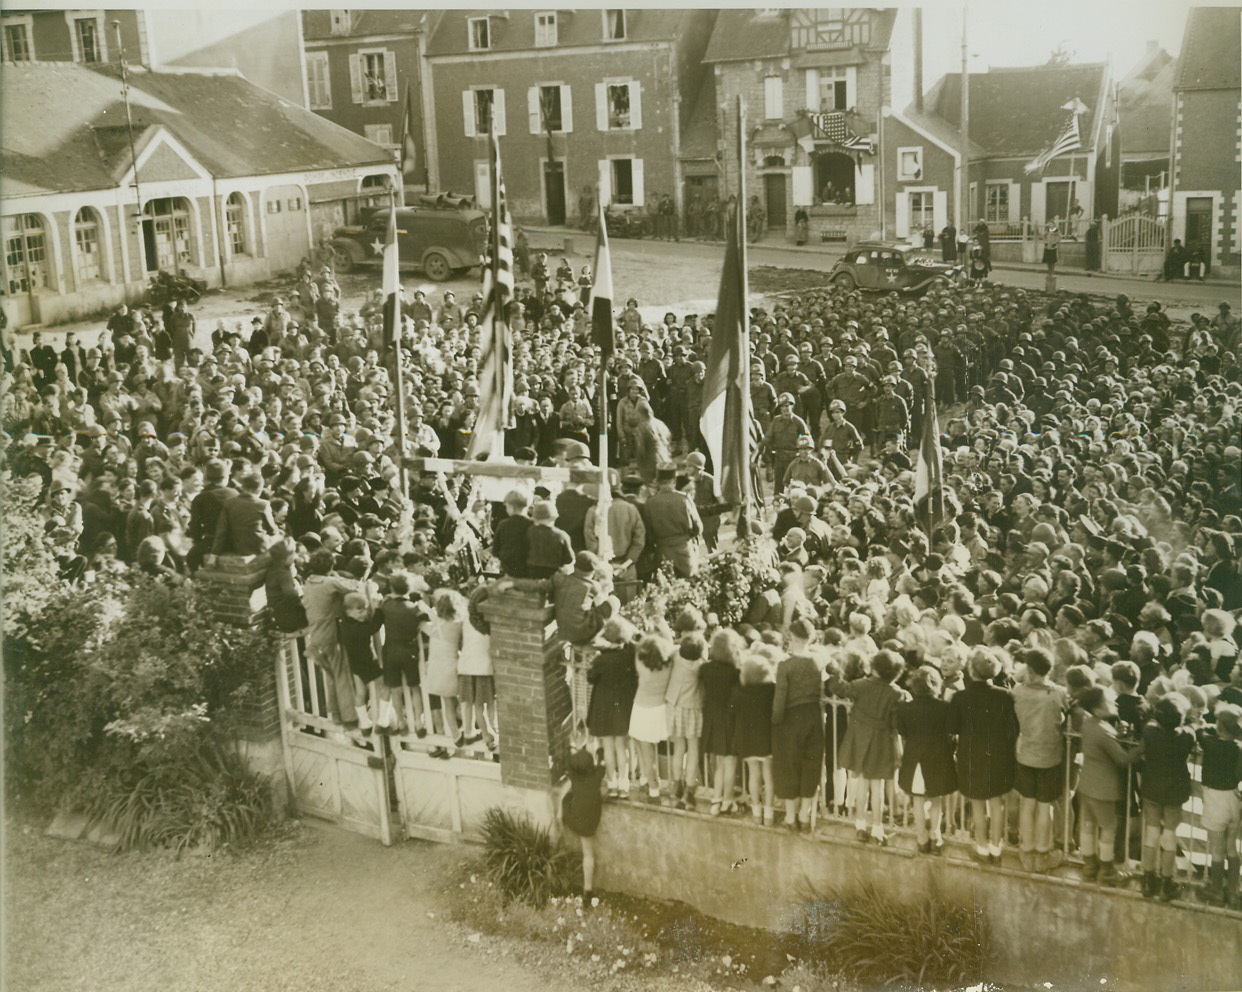 And Little Children Line The Rail, 7/9/1944. France—A huge crowd of 1600 residents of Grandcamp, Little Normandy town, gathered in the main square to help Yank troops of occupation celebrate Independence Day. It was a day of independence for the French inhabitants also. Suffering under the heel of the ruthless Nazis for four years, Grandcamp is grateful to the Americans who liberated them. Town was the first freed by the Yanks. Note the little children lined on the rail anxious to see the celebration.  Credit: ACME photo by Bert Brandt, War Pool Correspondent;